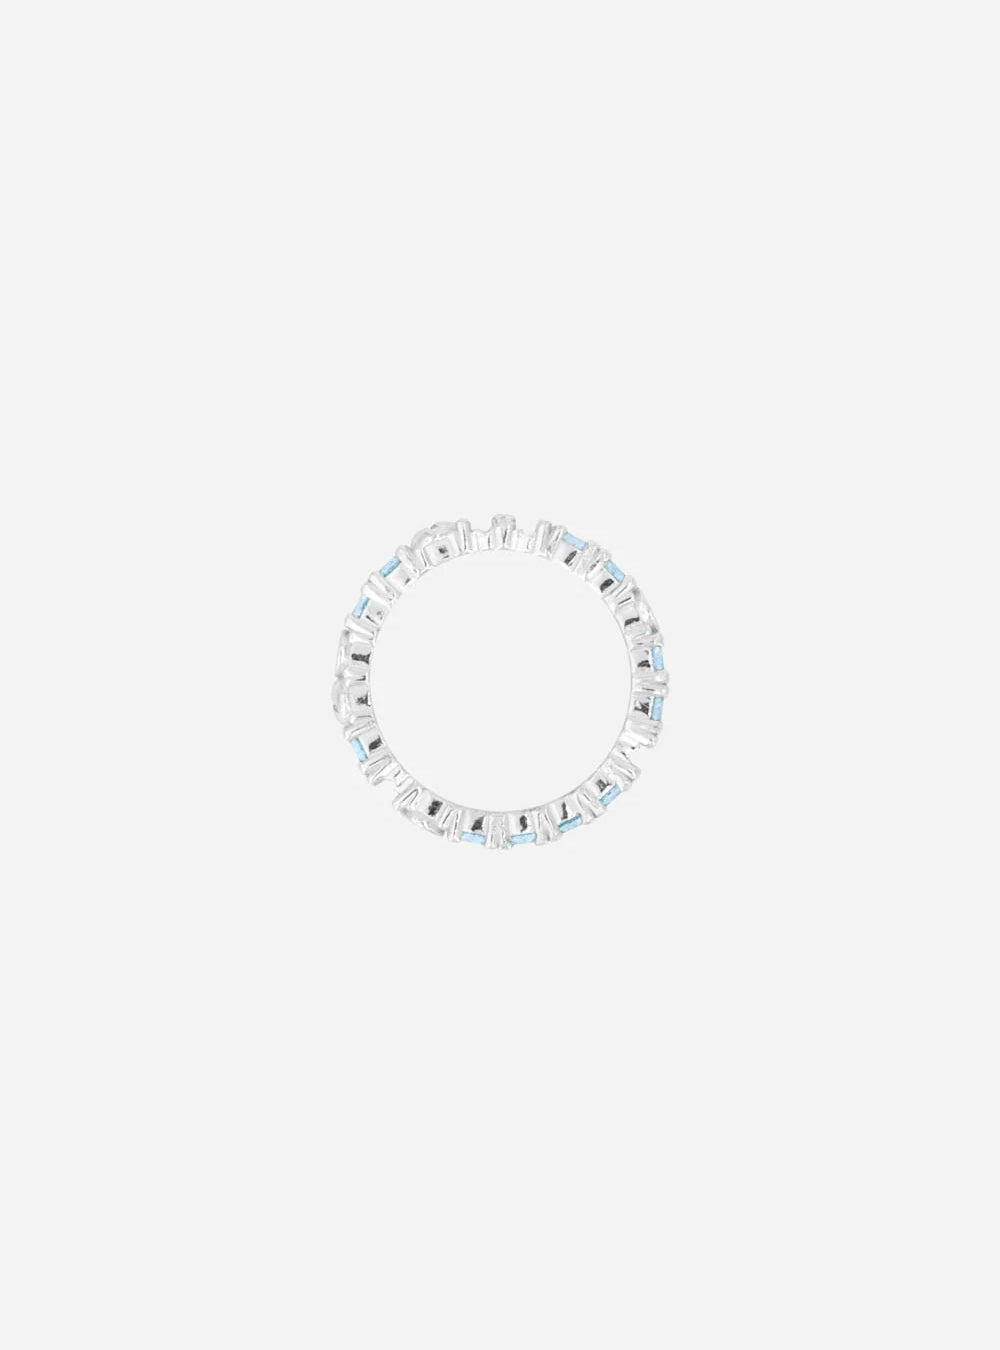 a Broken eternity ring with topaz stones by MIDNIGHTFACTORY.